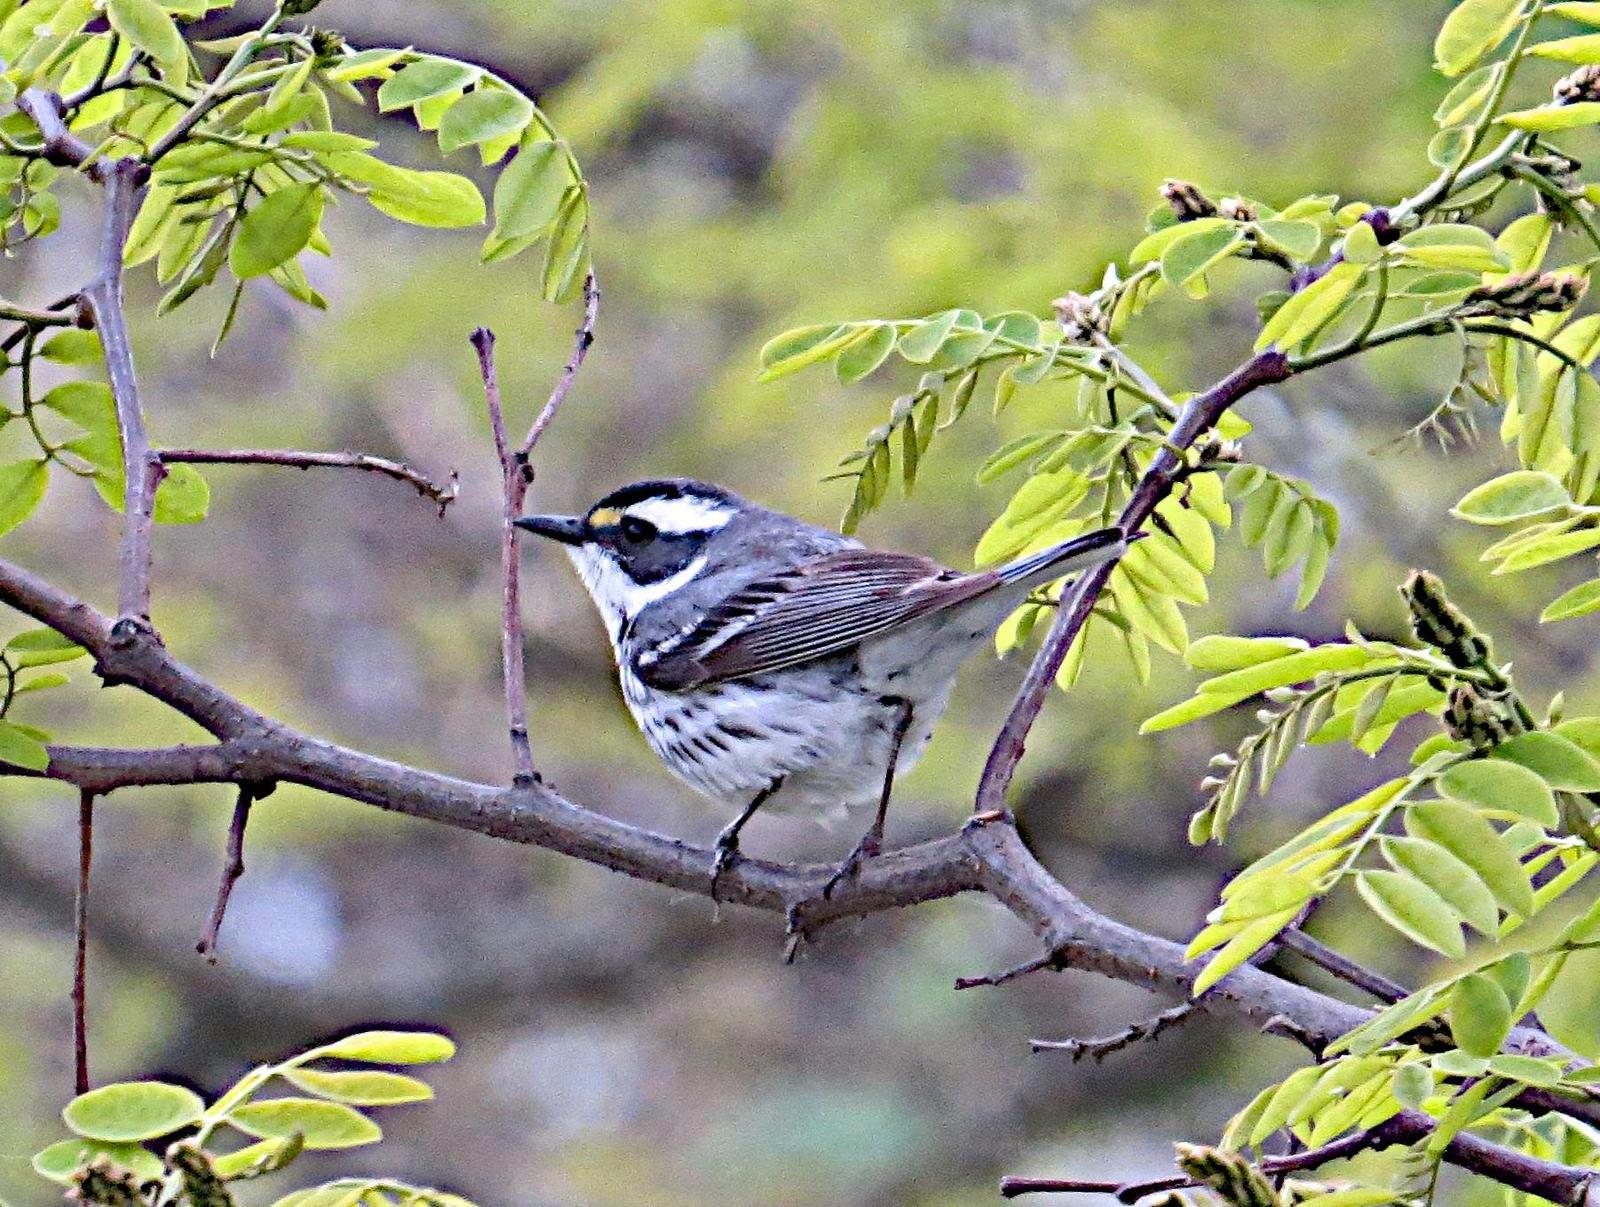 Black-throated Gray Warbler Photo by Brian Avent